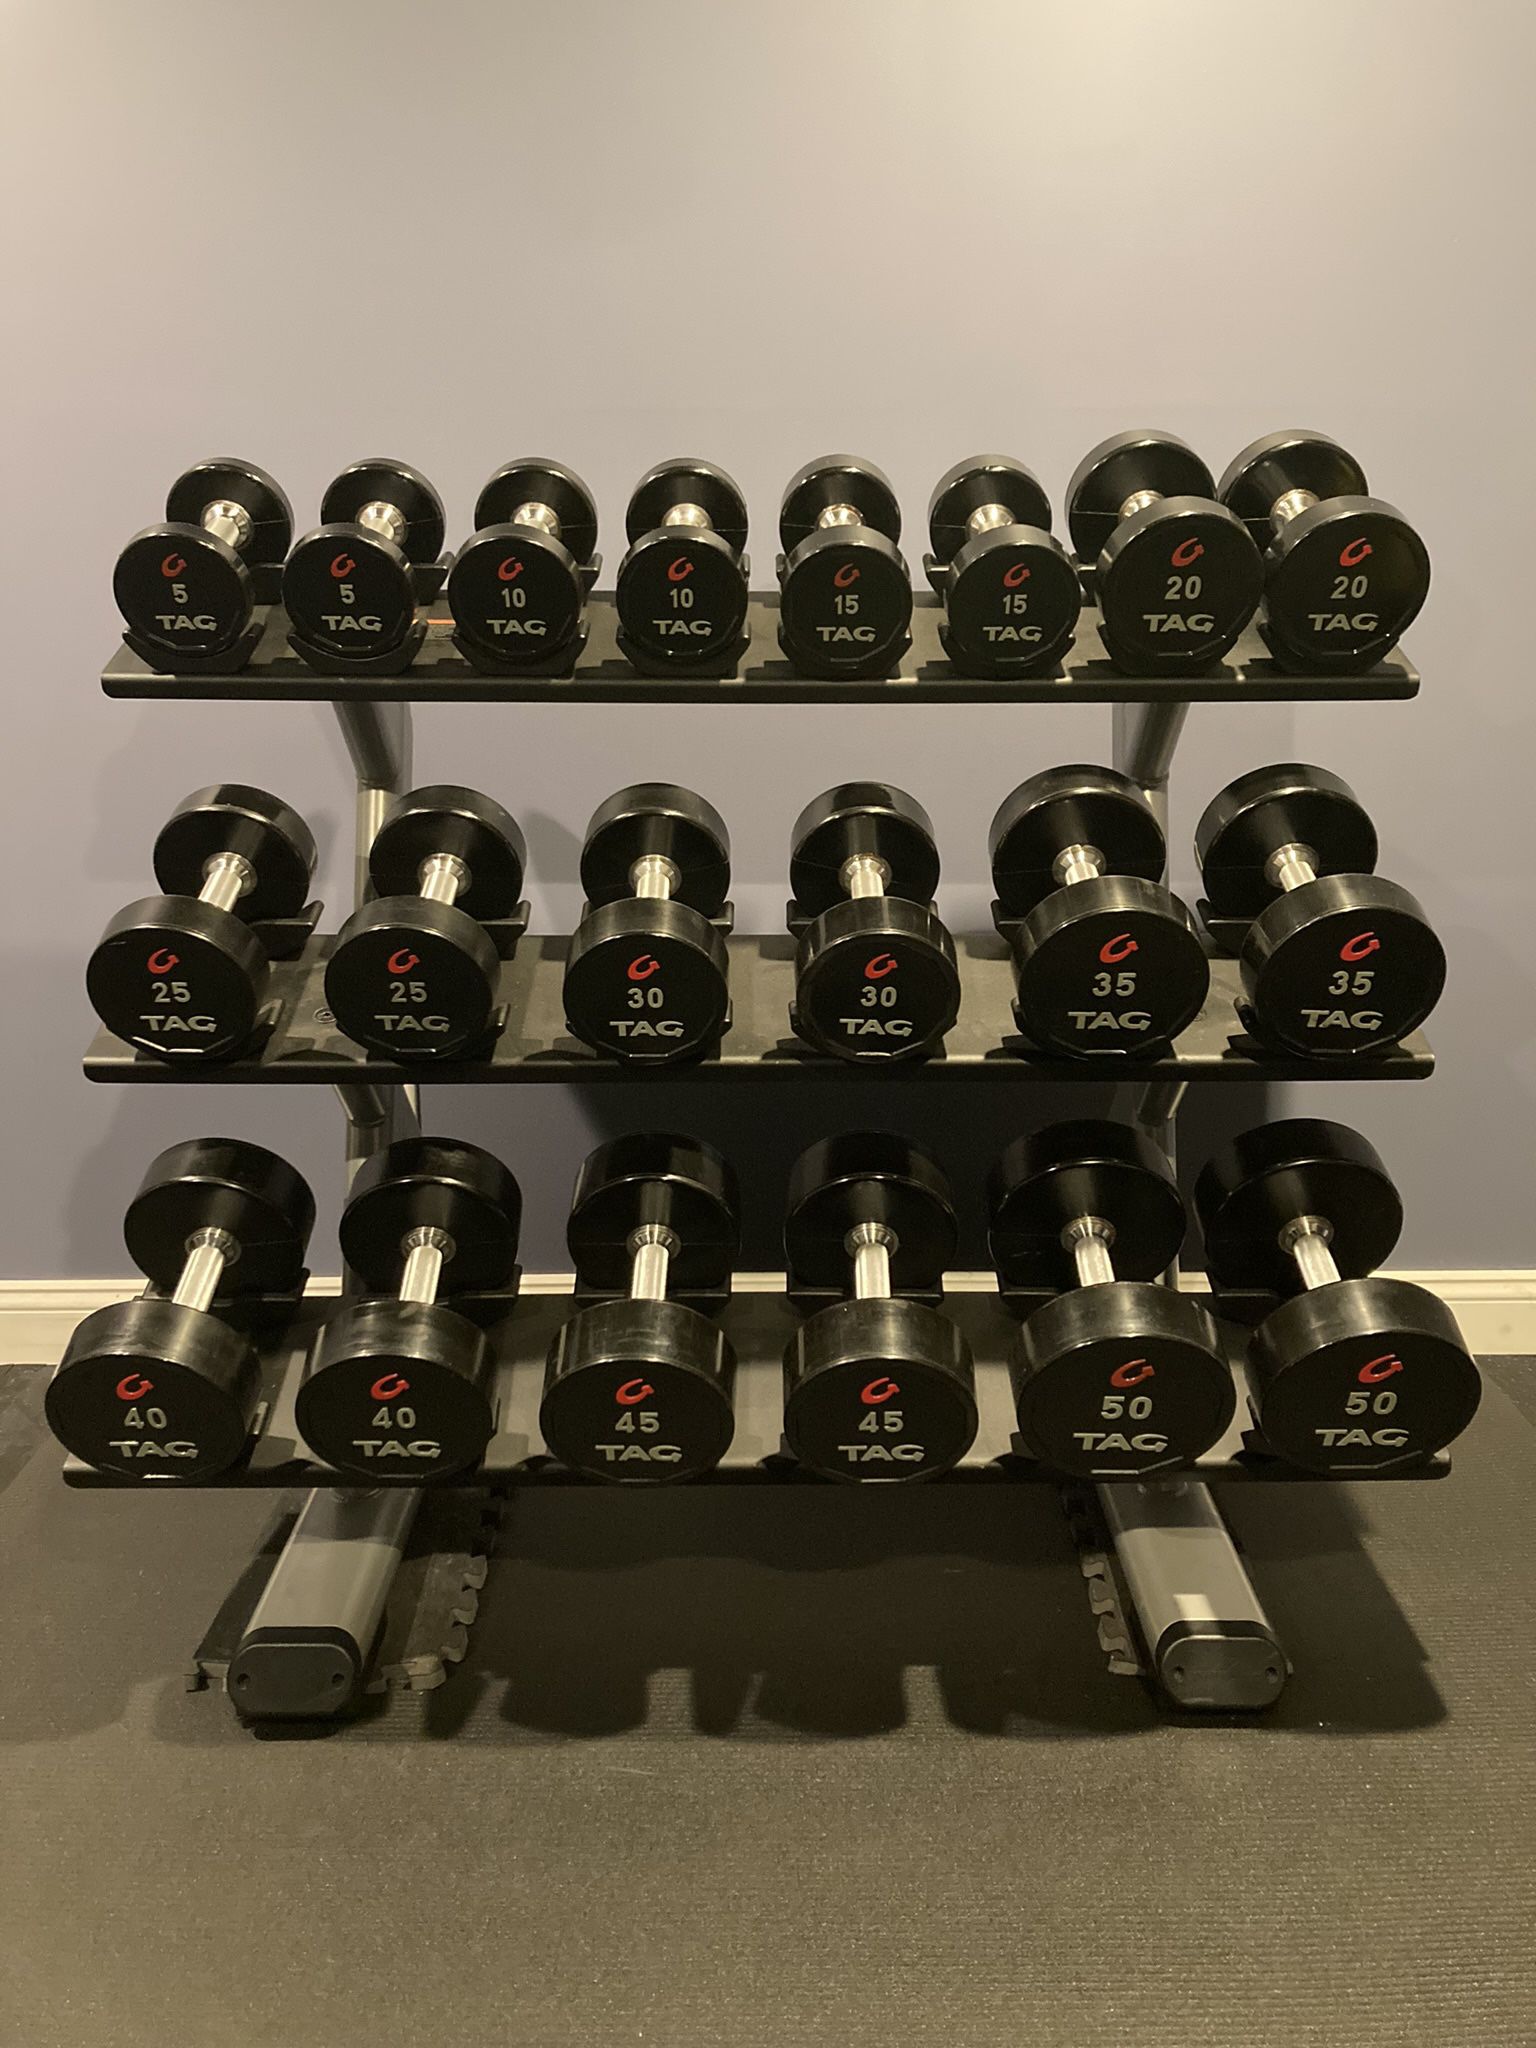 TAG Urethane Dumbbells Complete 5-50 Lb Set With 3-tier Precor Rack - Retails for Over $4,500